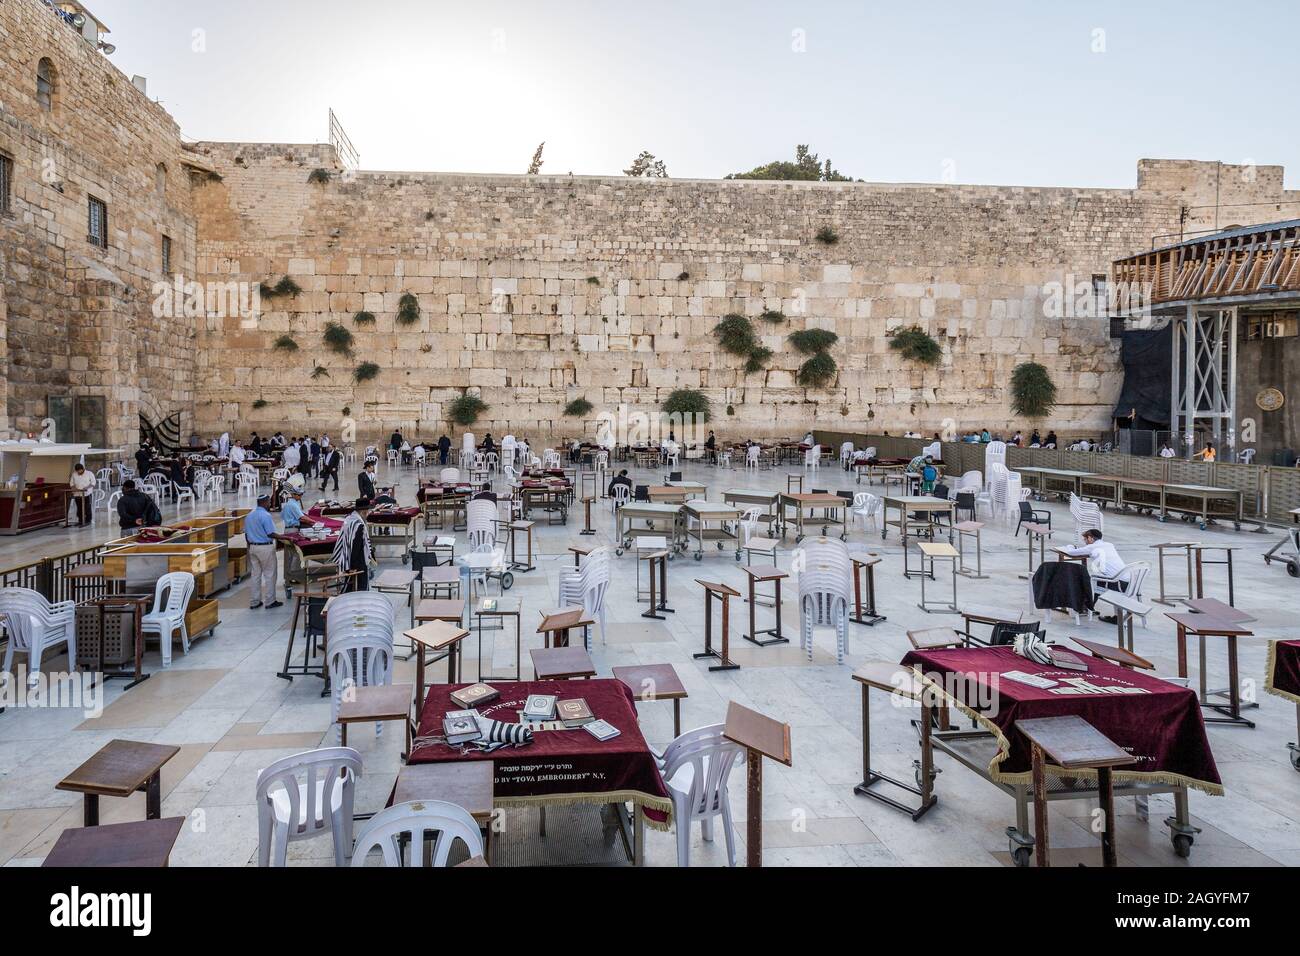 JERUSALEM ISRAEL - JUNE 14, 2017: West Wall and people in old town of Jerusalem. Stock Photo